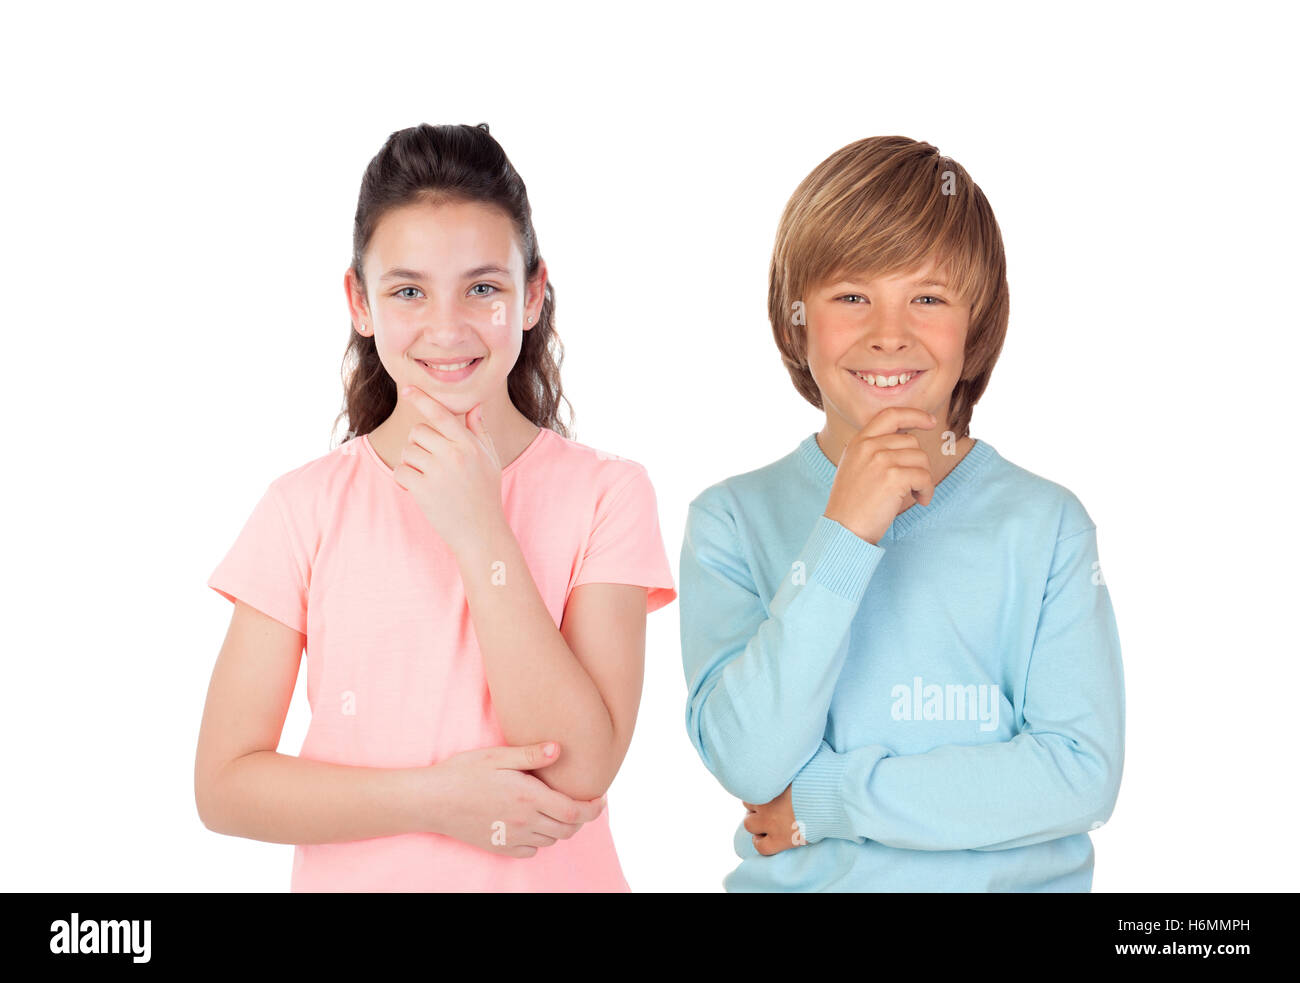 Couple of teenagers thinking isolated on a white background Stock Photo